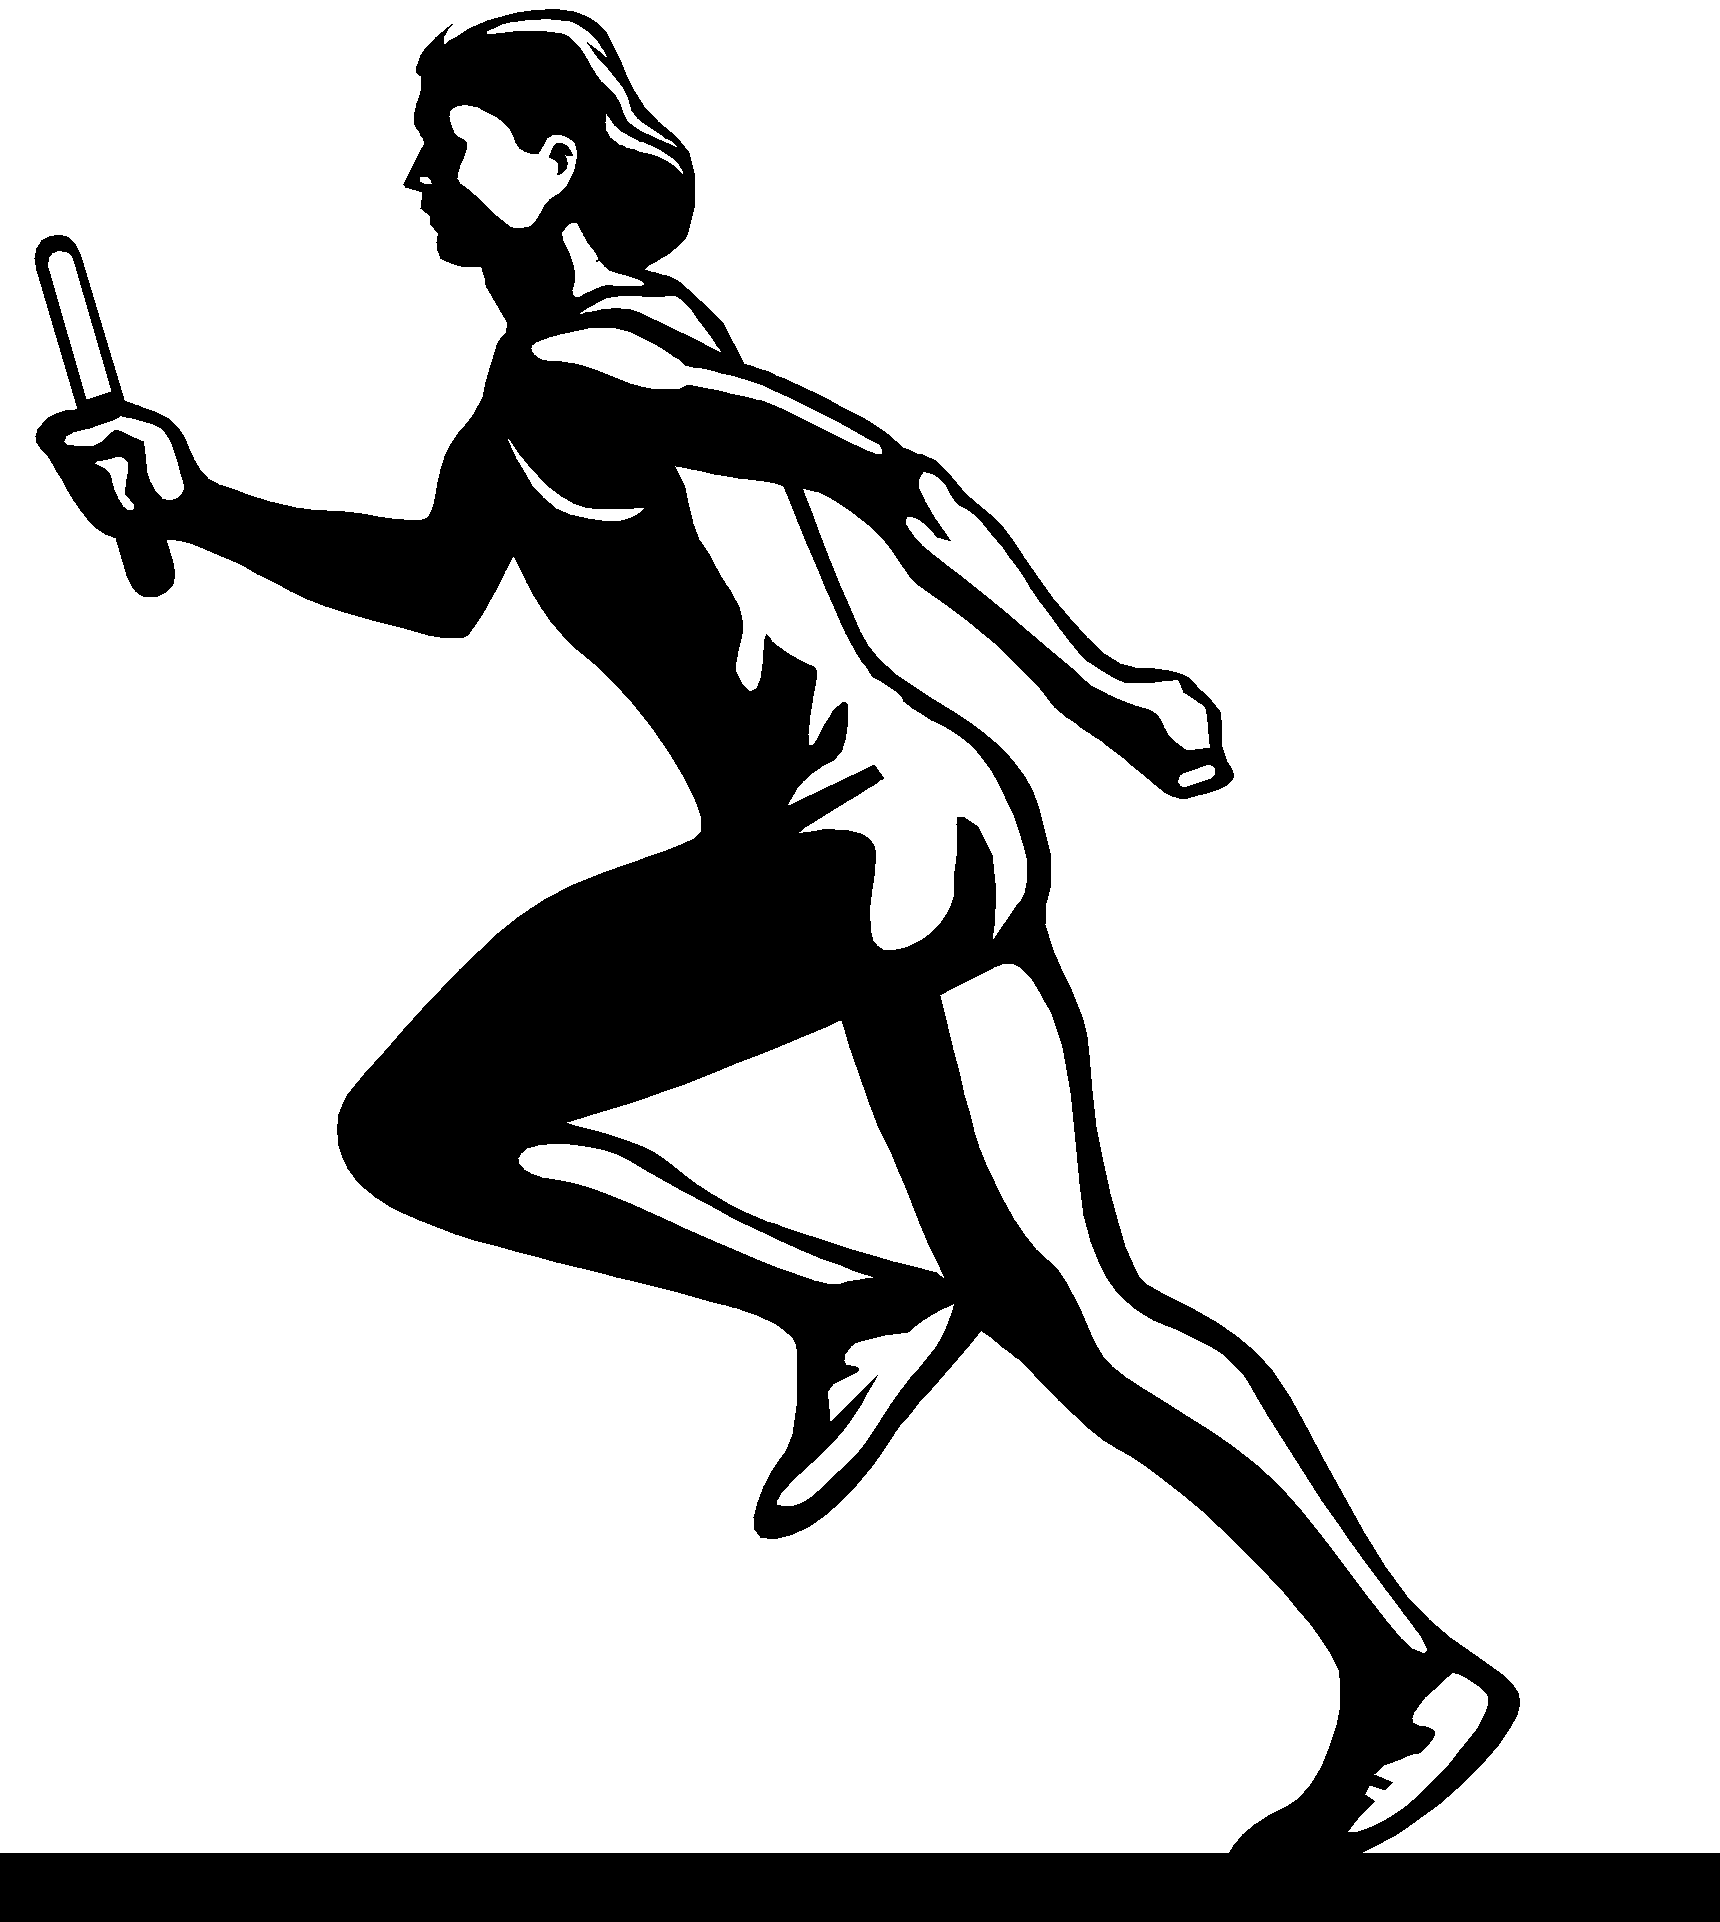 Track and field clip art the cliparts 2